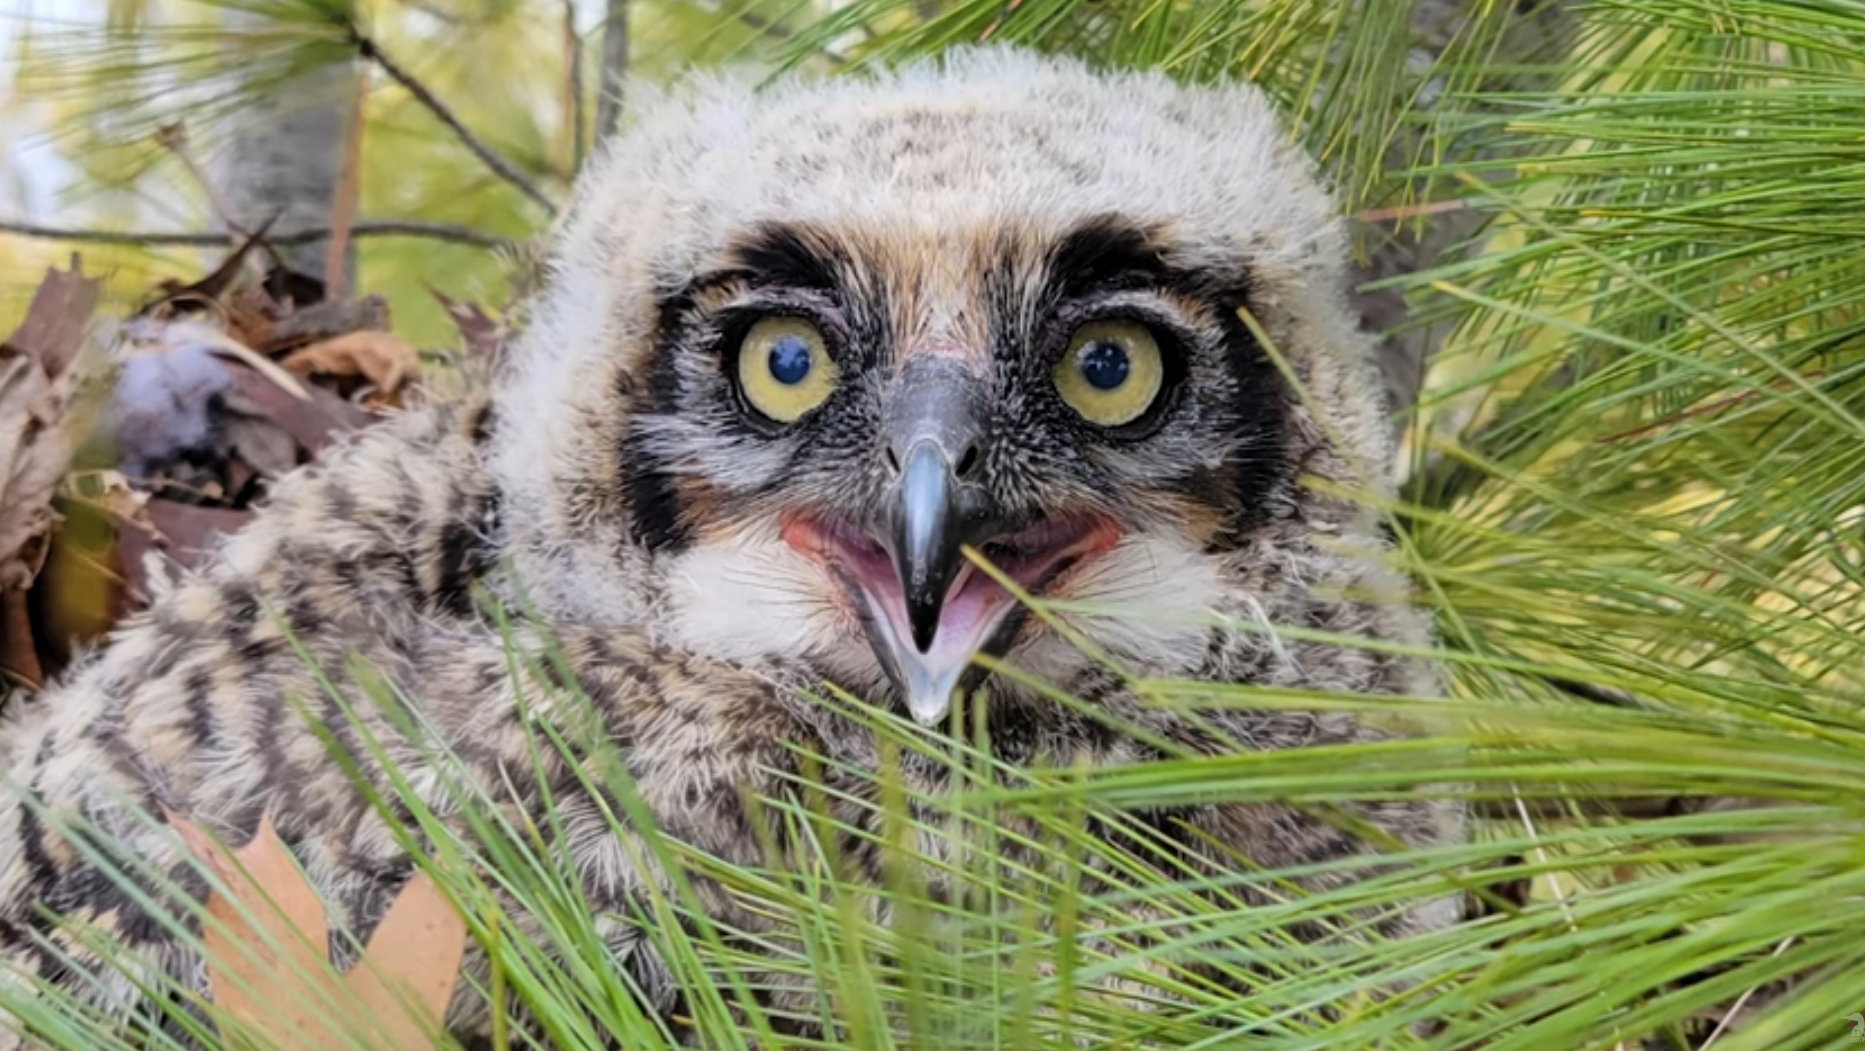 Baby owl rescued and reunited with mother in Brampton